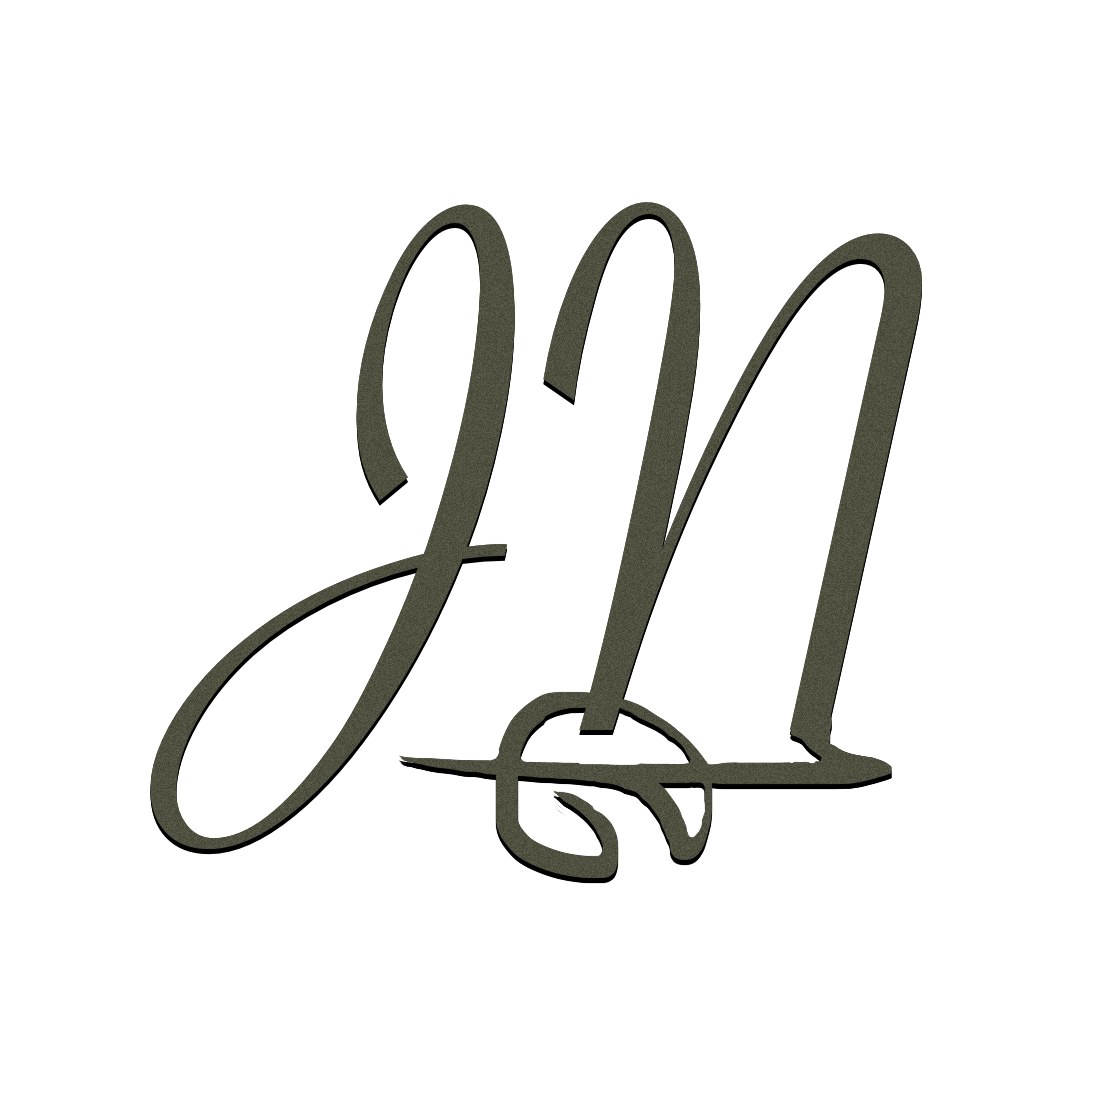 The initials of the author - J. N.